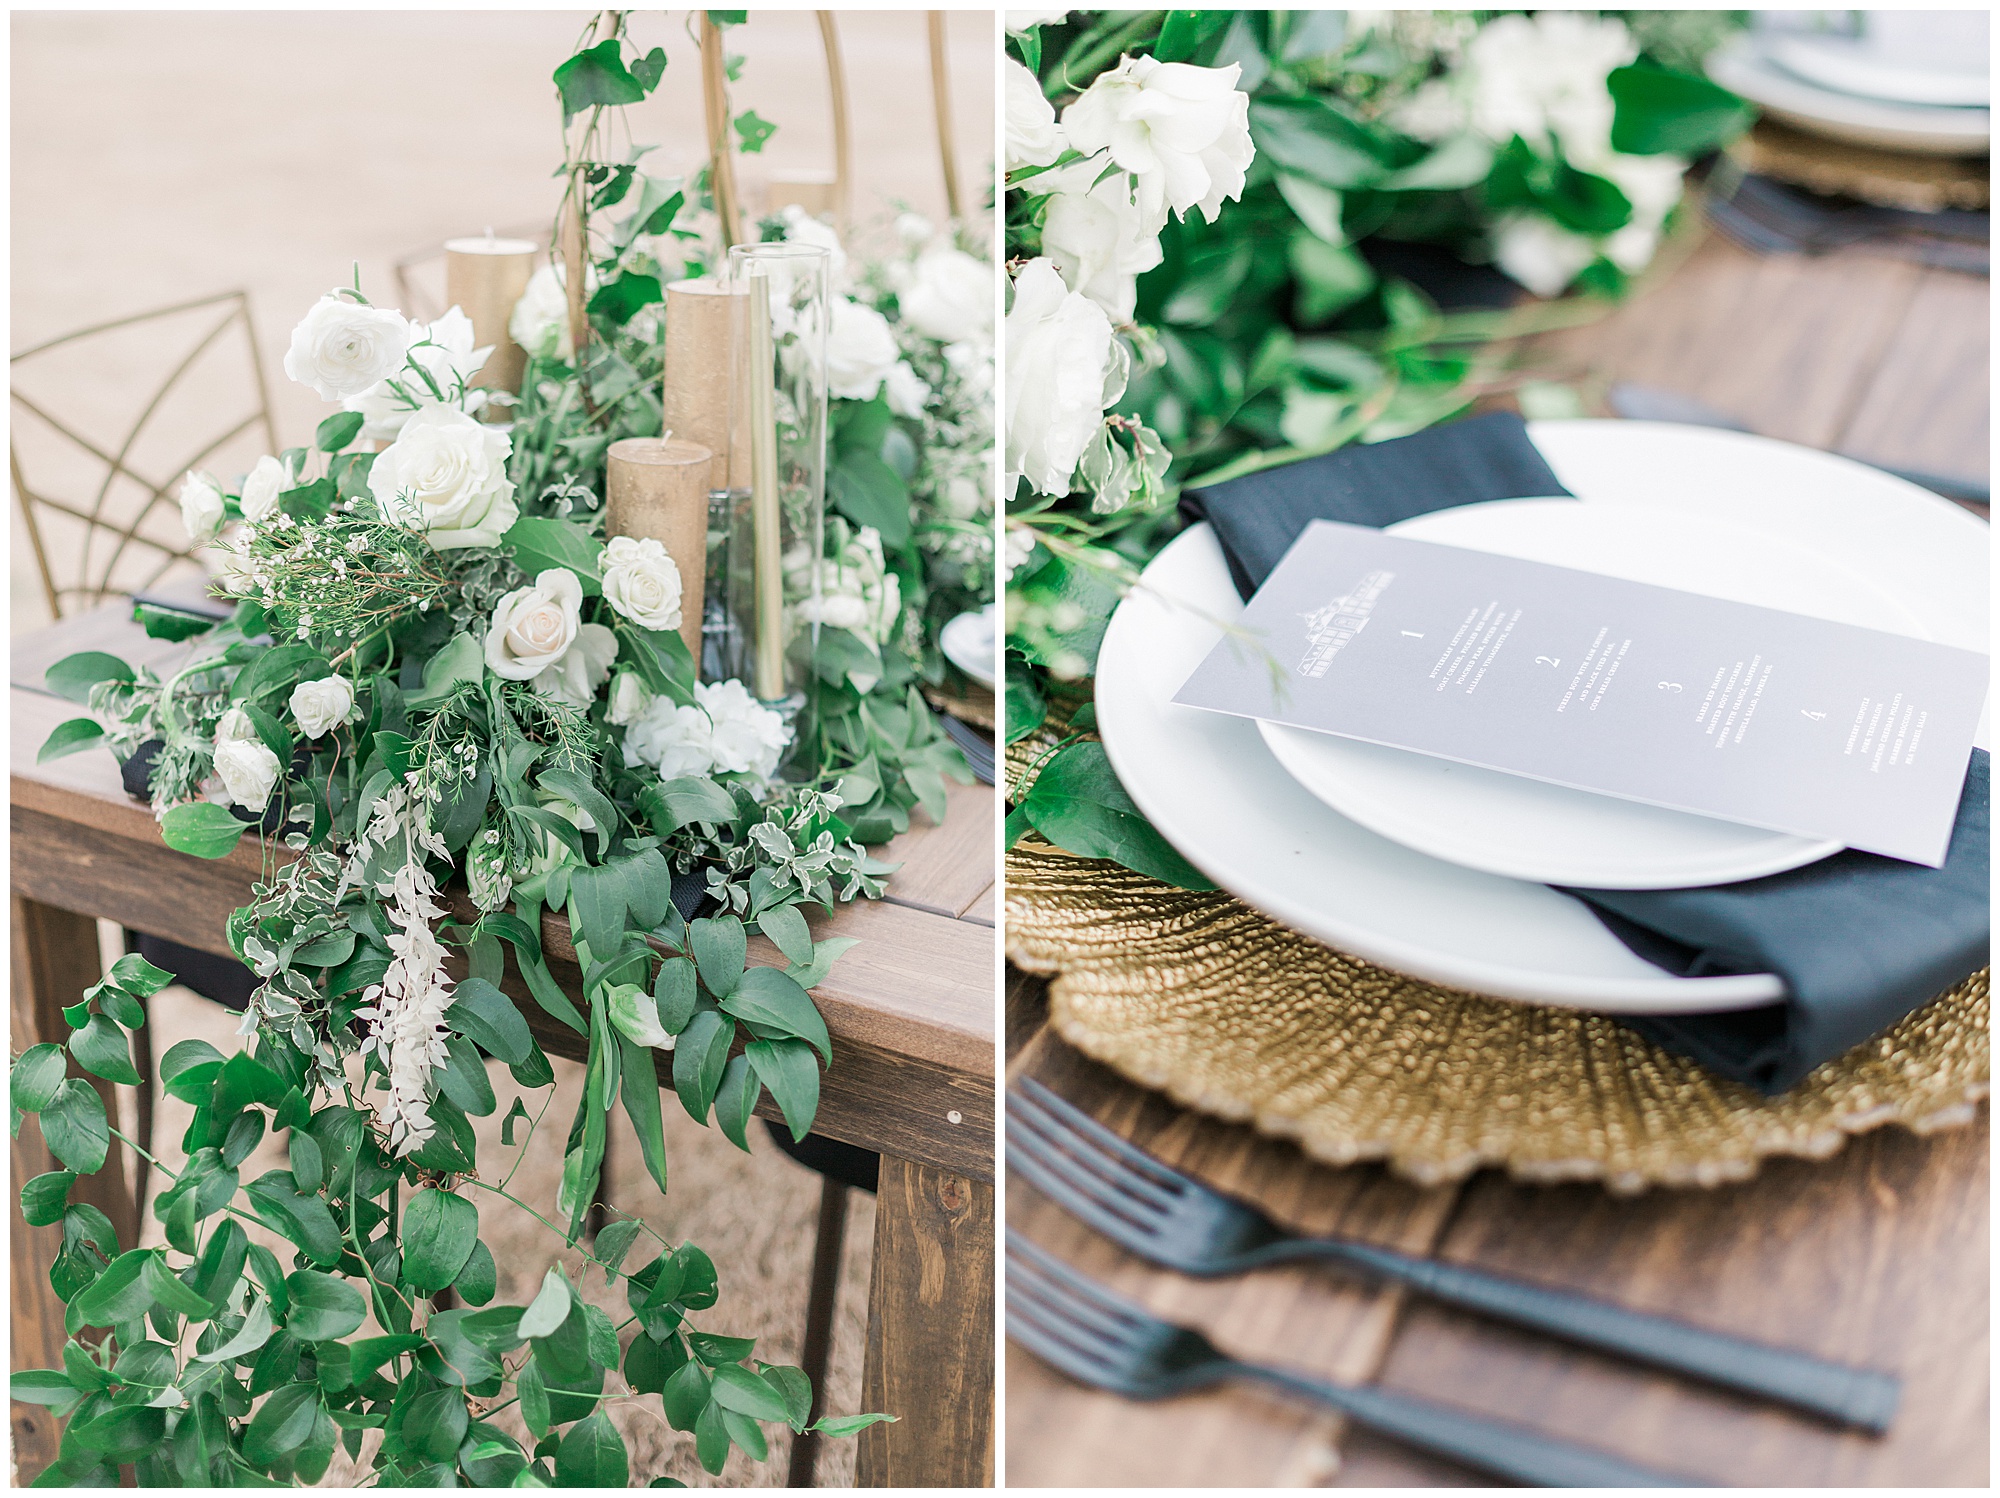 Black and White Wedding Details with Greenery